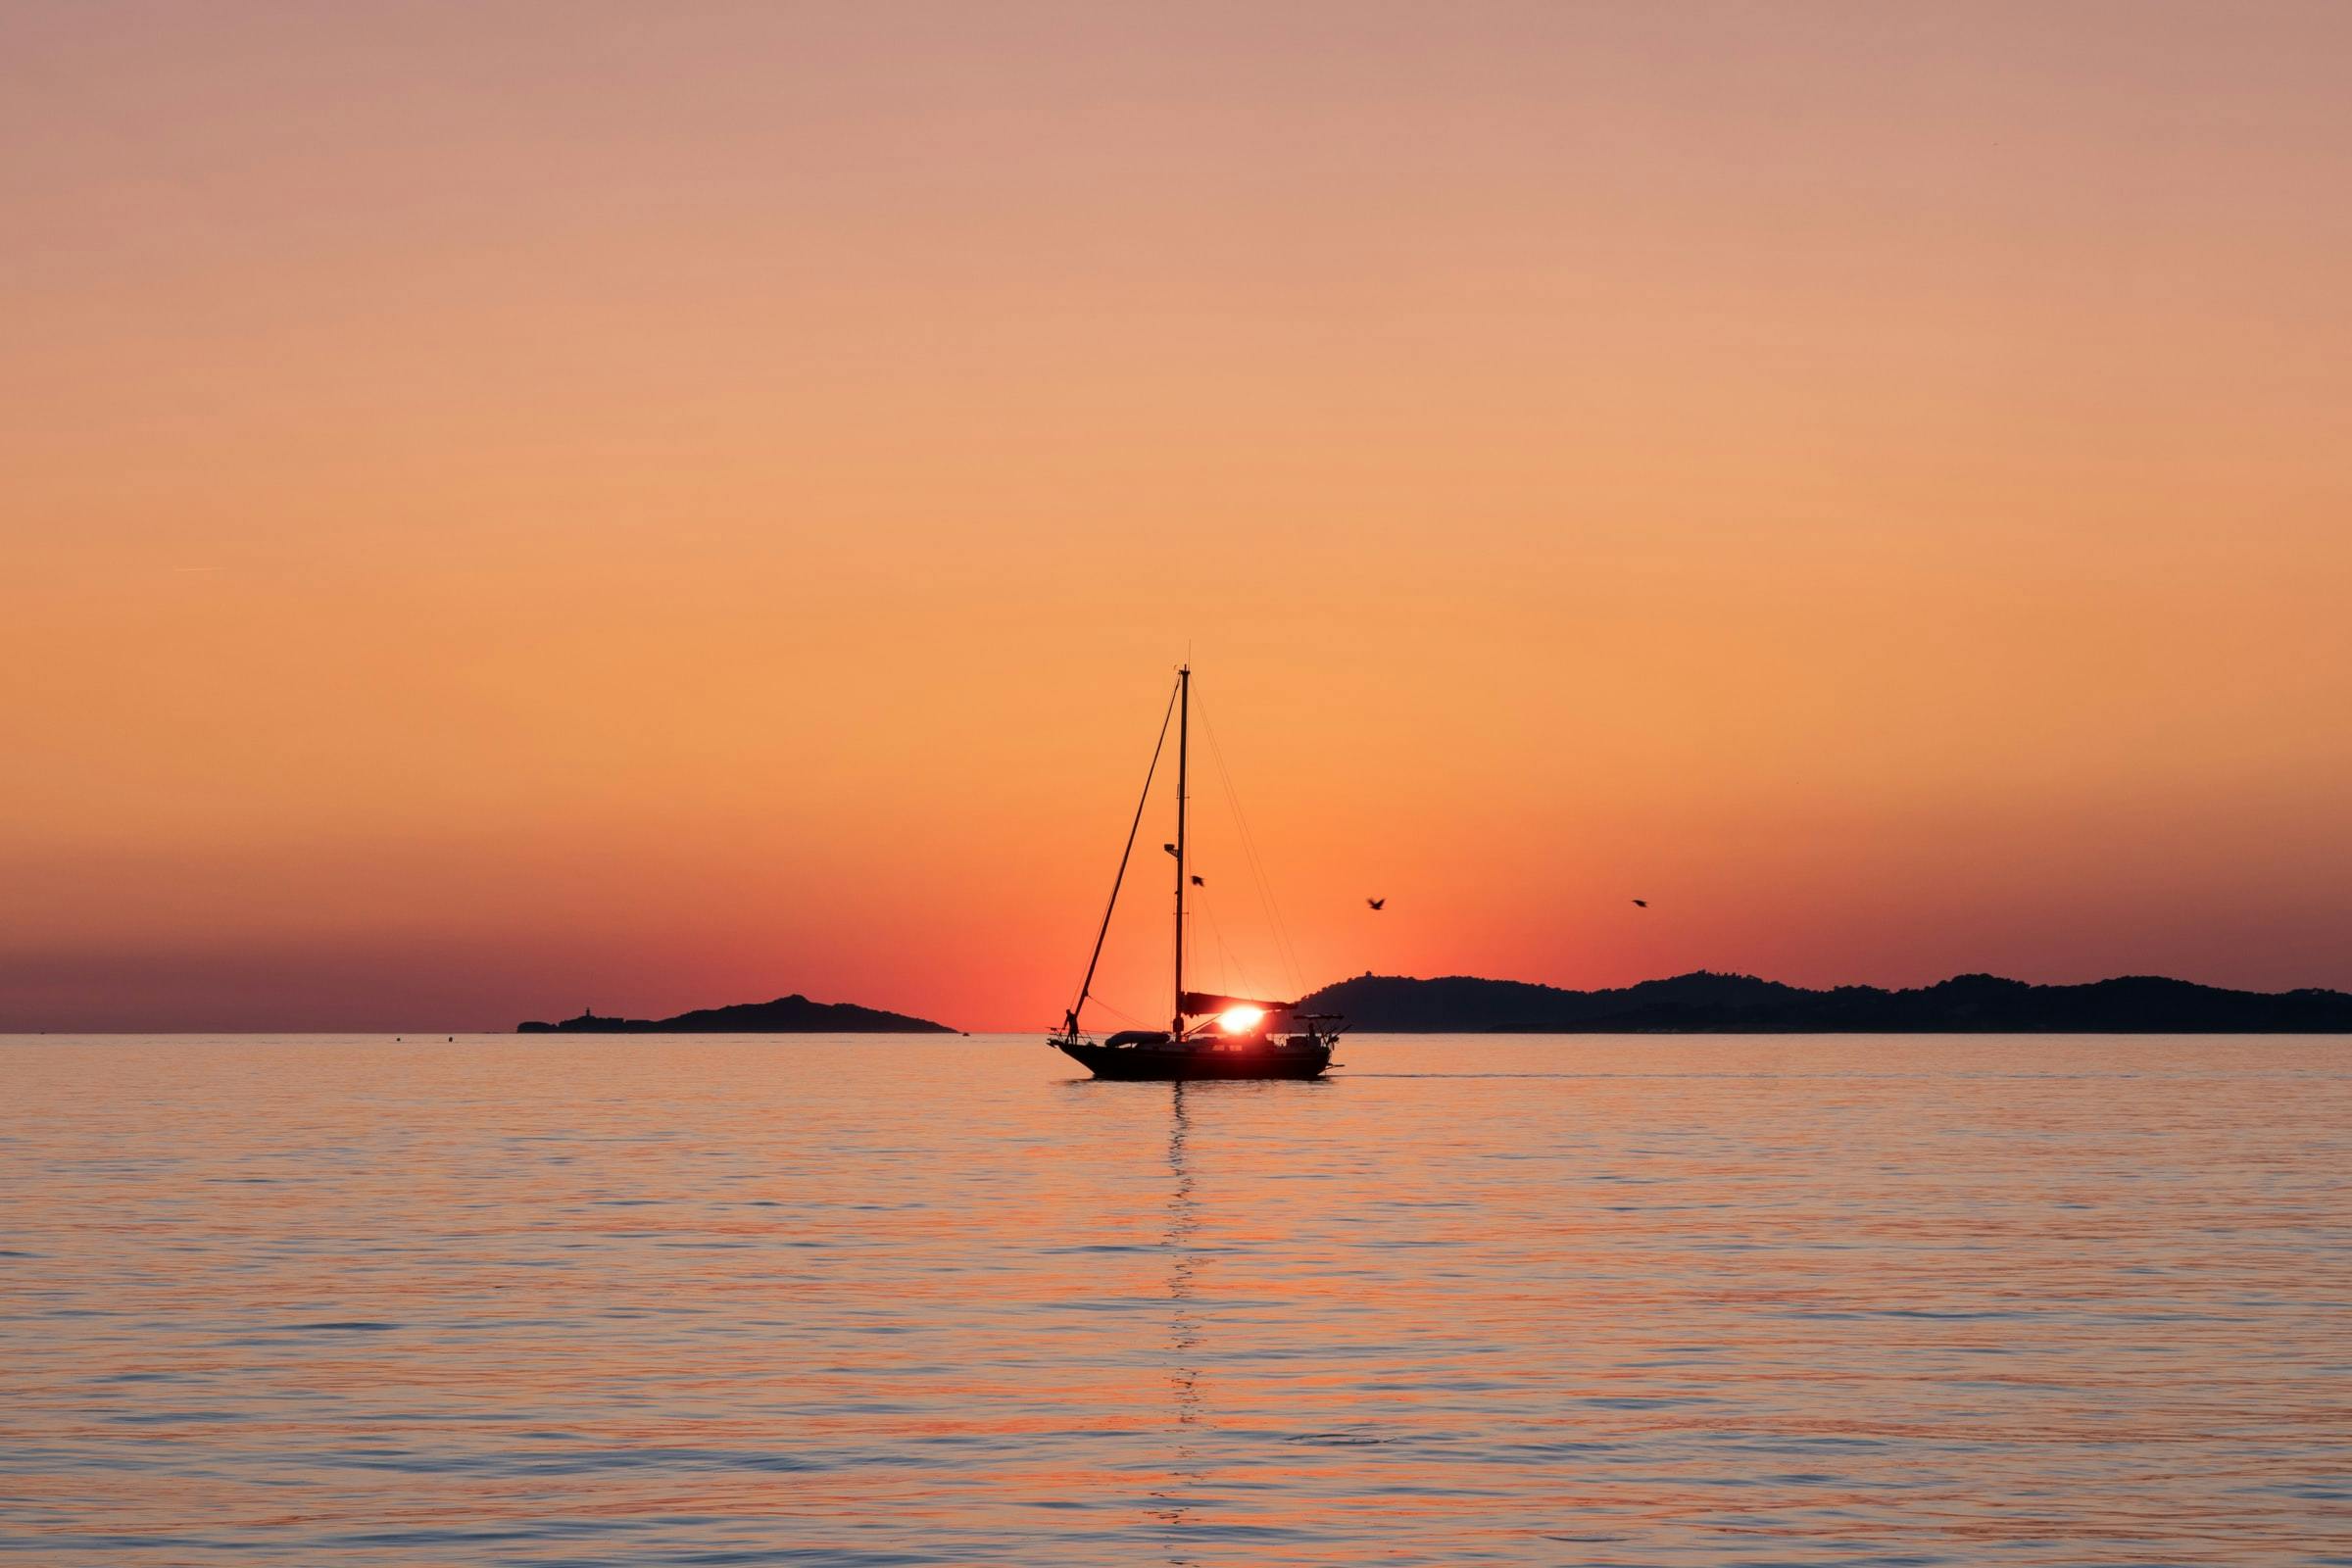 Boat in an orange and red sunset